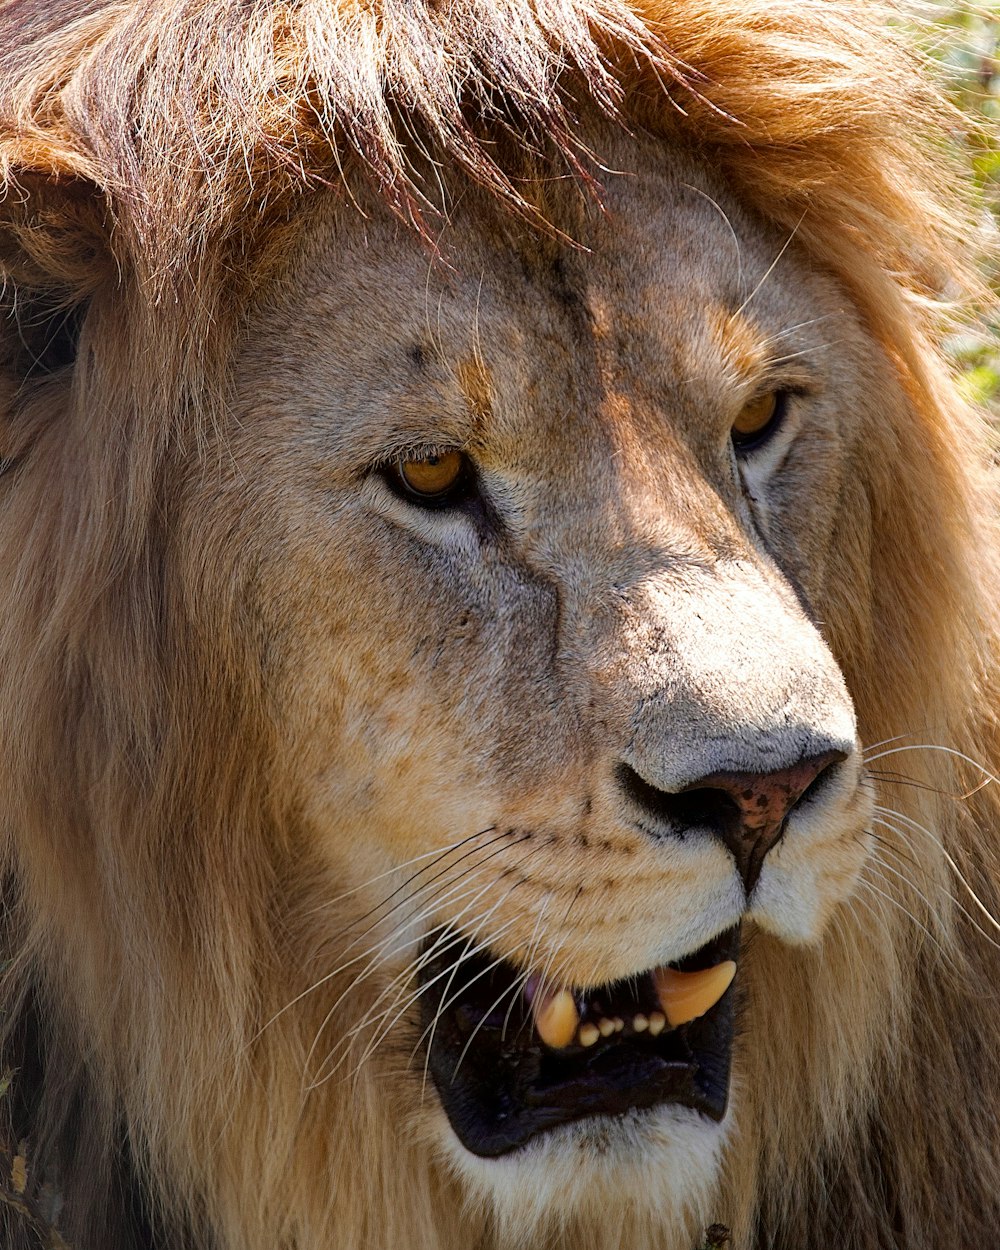 a close up of a lion's face with grass in the background